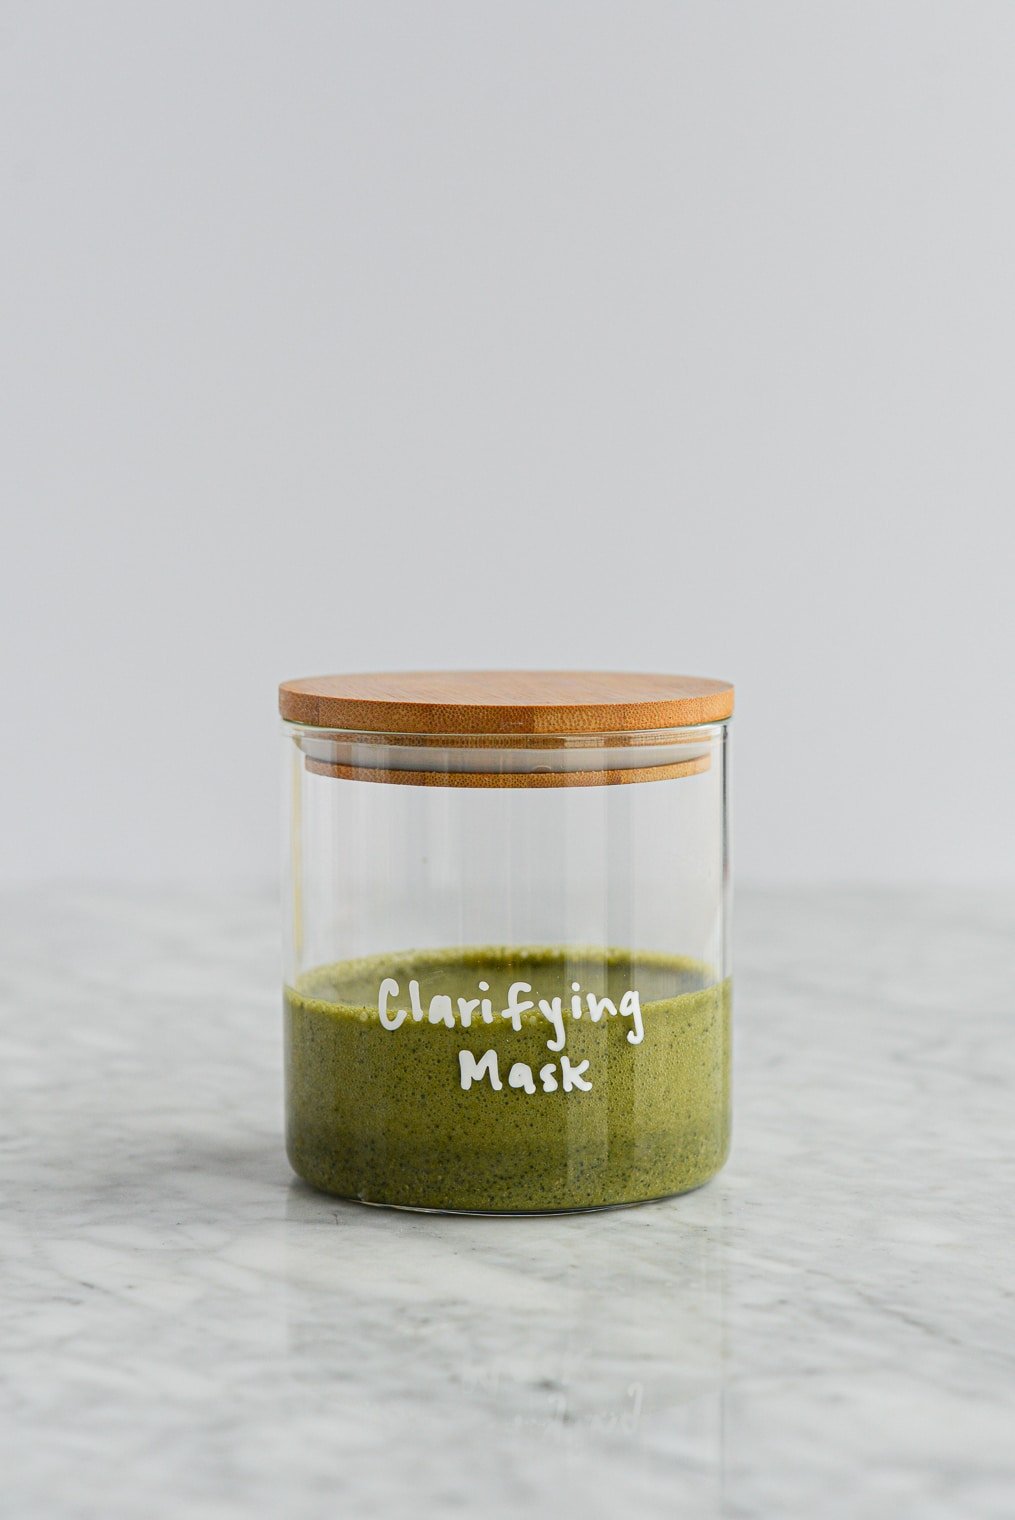 dark green matcha and clay peel off mask in a glass jar with a wooden lid with clarifying mask written on the jar in white lettering on a marble surface